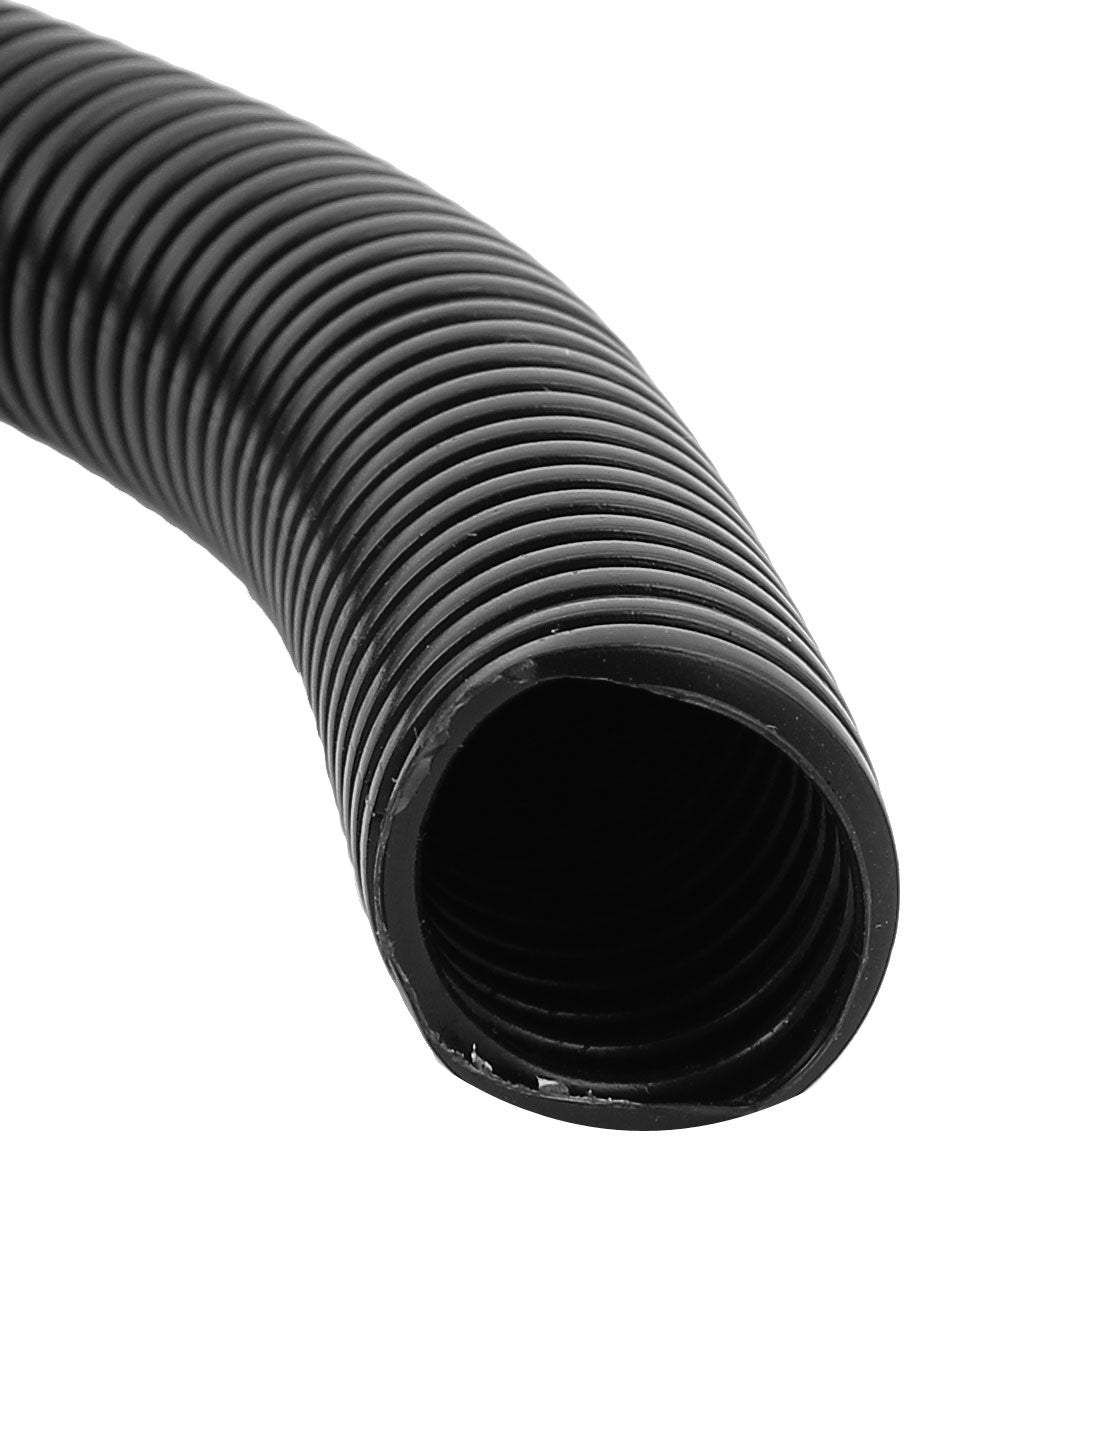 uxcell Uxcell 2.3 M 20 x 25 mm PVC Flexible Corrugated Conduit Tube for Garden,Office Black